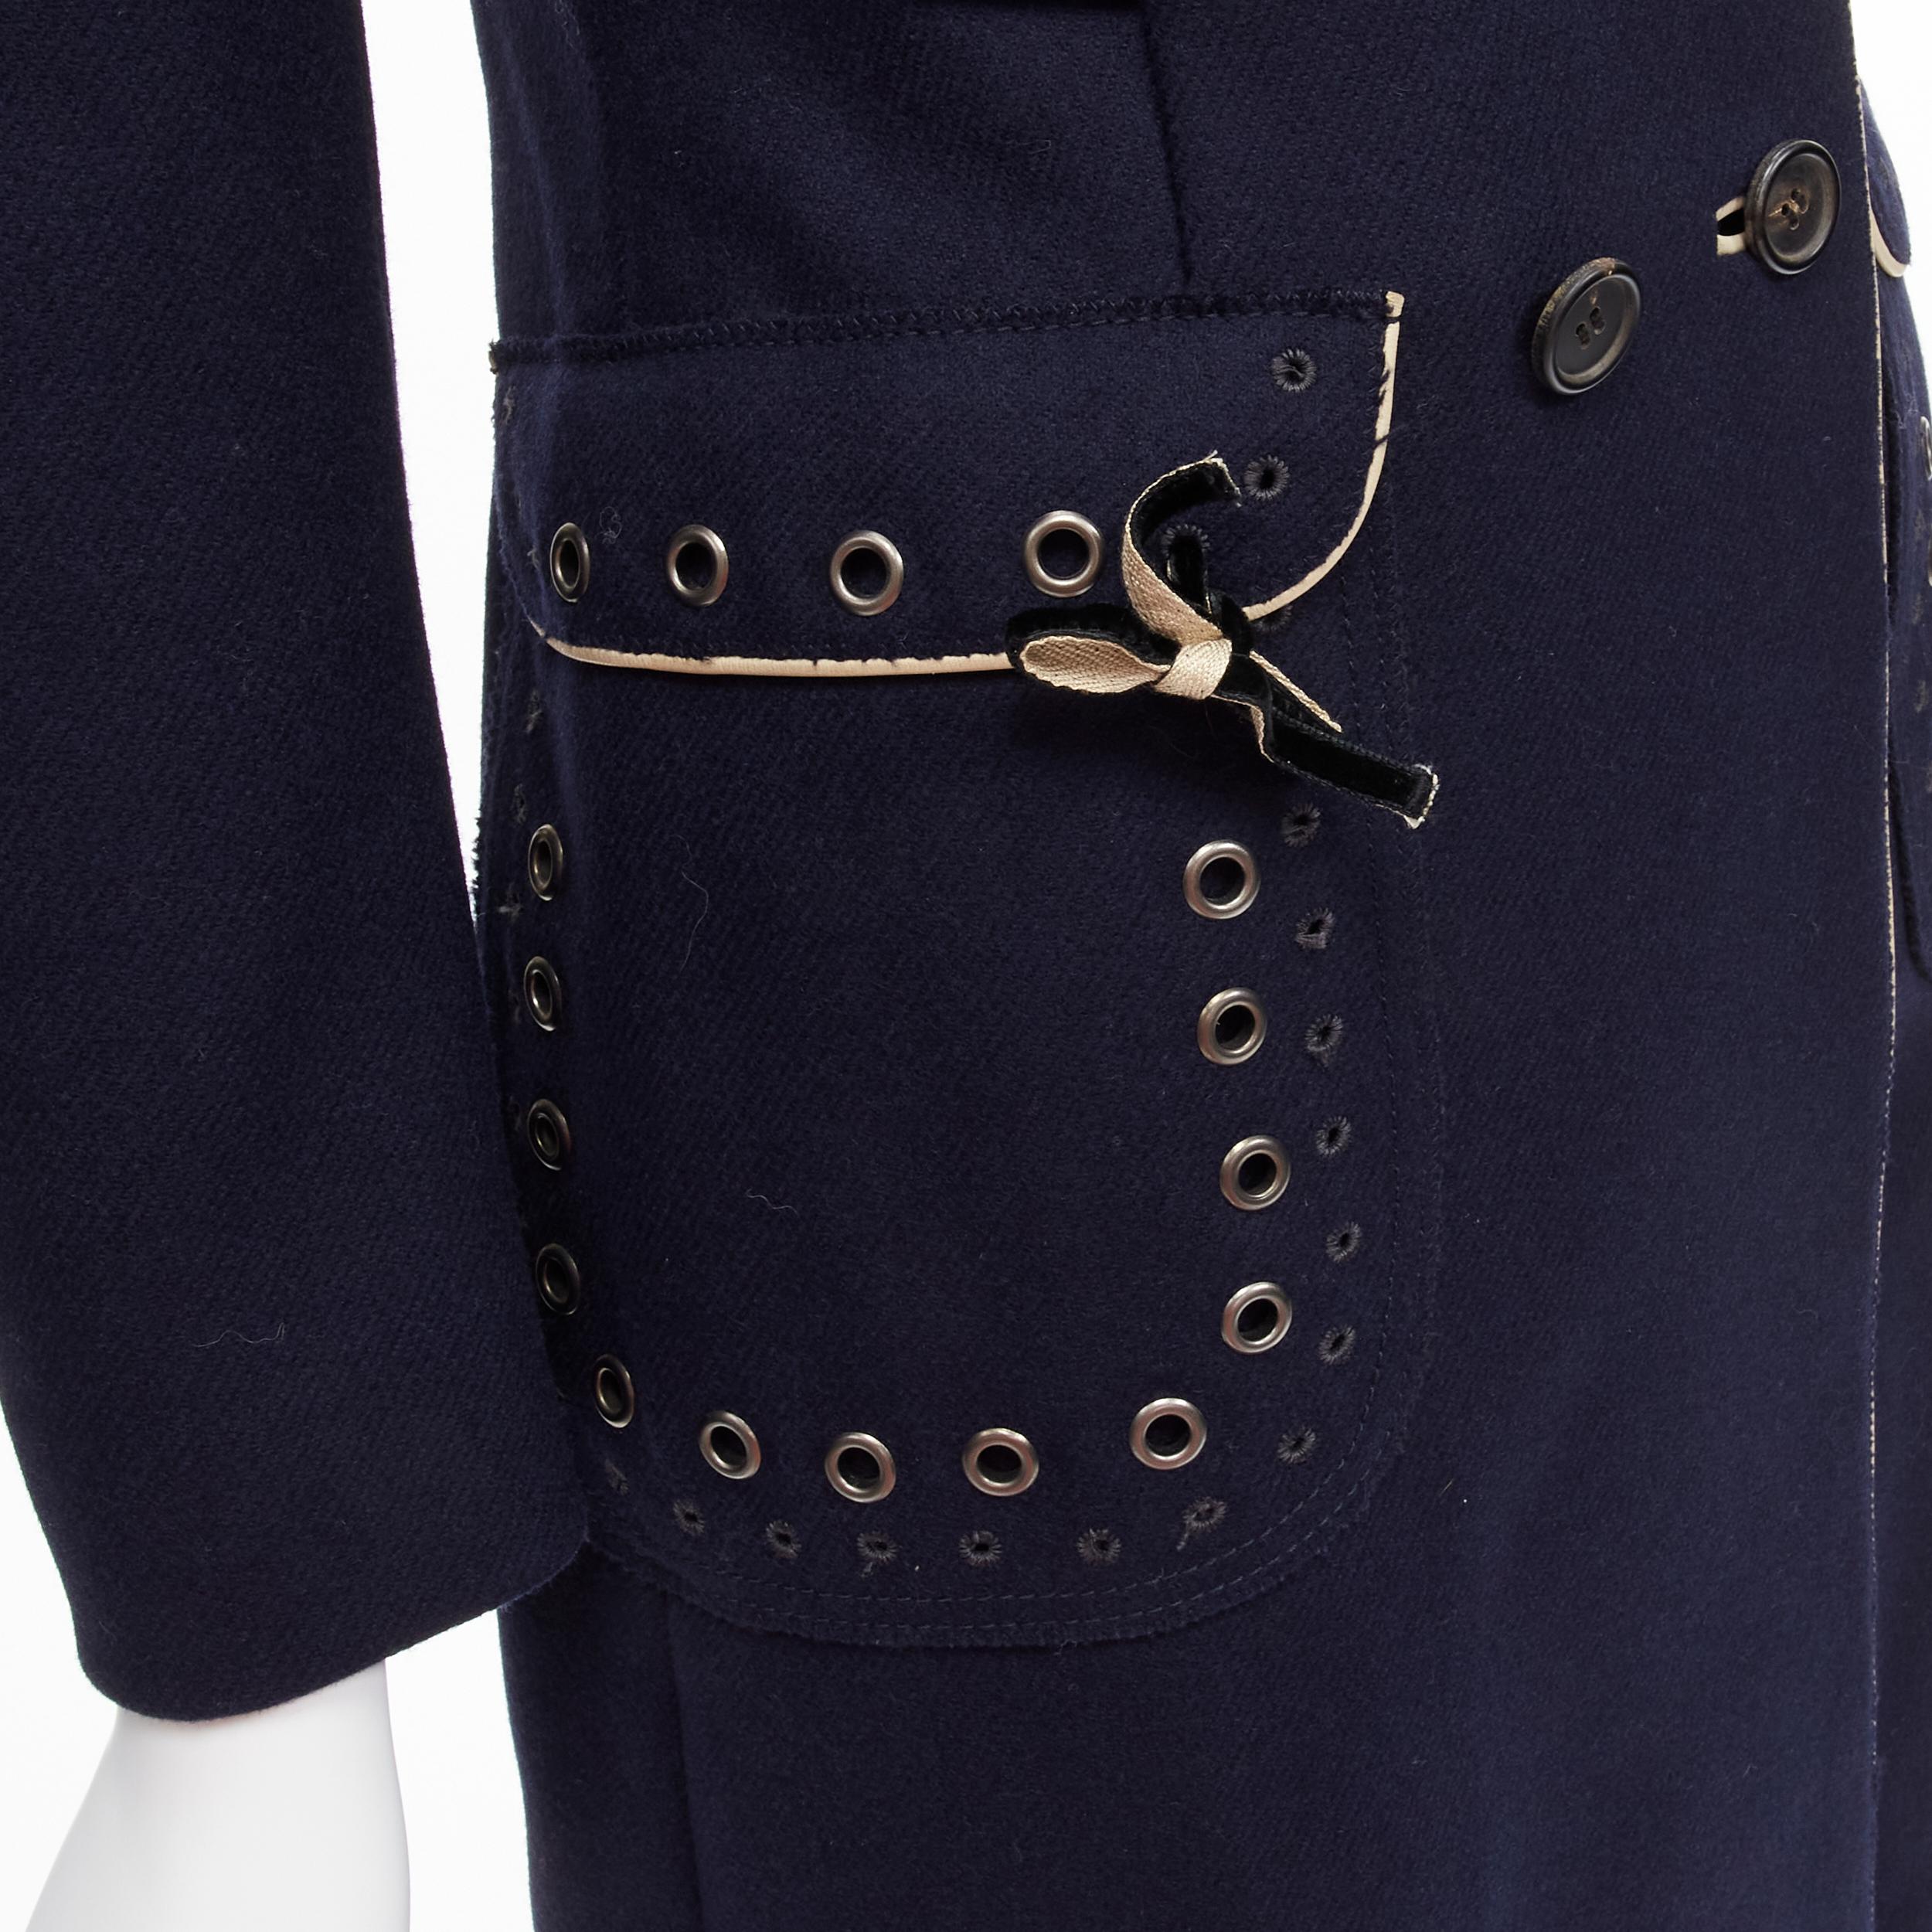 rare PRADA 2004 Look 46 navy blue wool grommet leather trim longline officer coat IT36 XXS
Reference: TGAS/D00128
Brand: Prada
Designer: Miuccia Prada
Collection: Fall 2004 - Runway
Material: Wool, Leather
Color: Navy, White
Pattern: Solid
Closure: